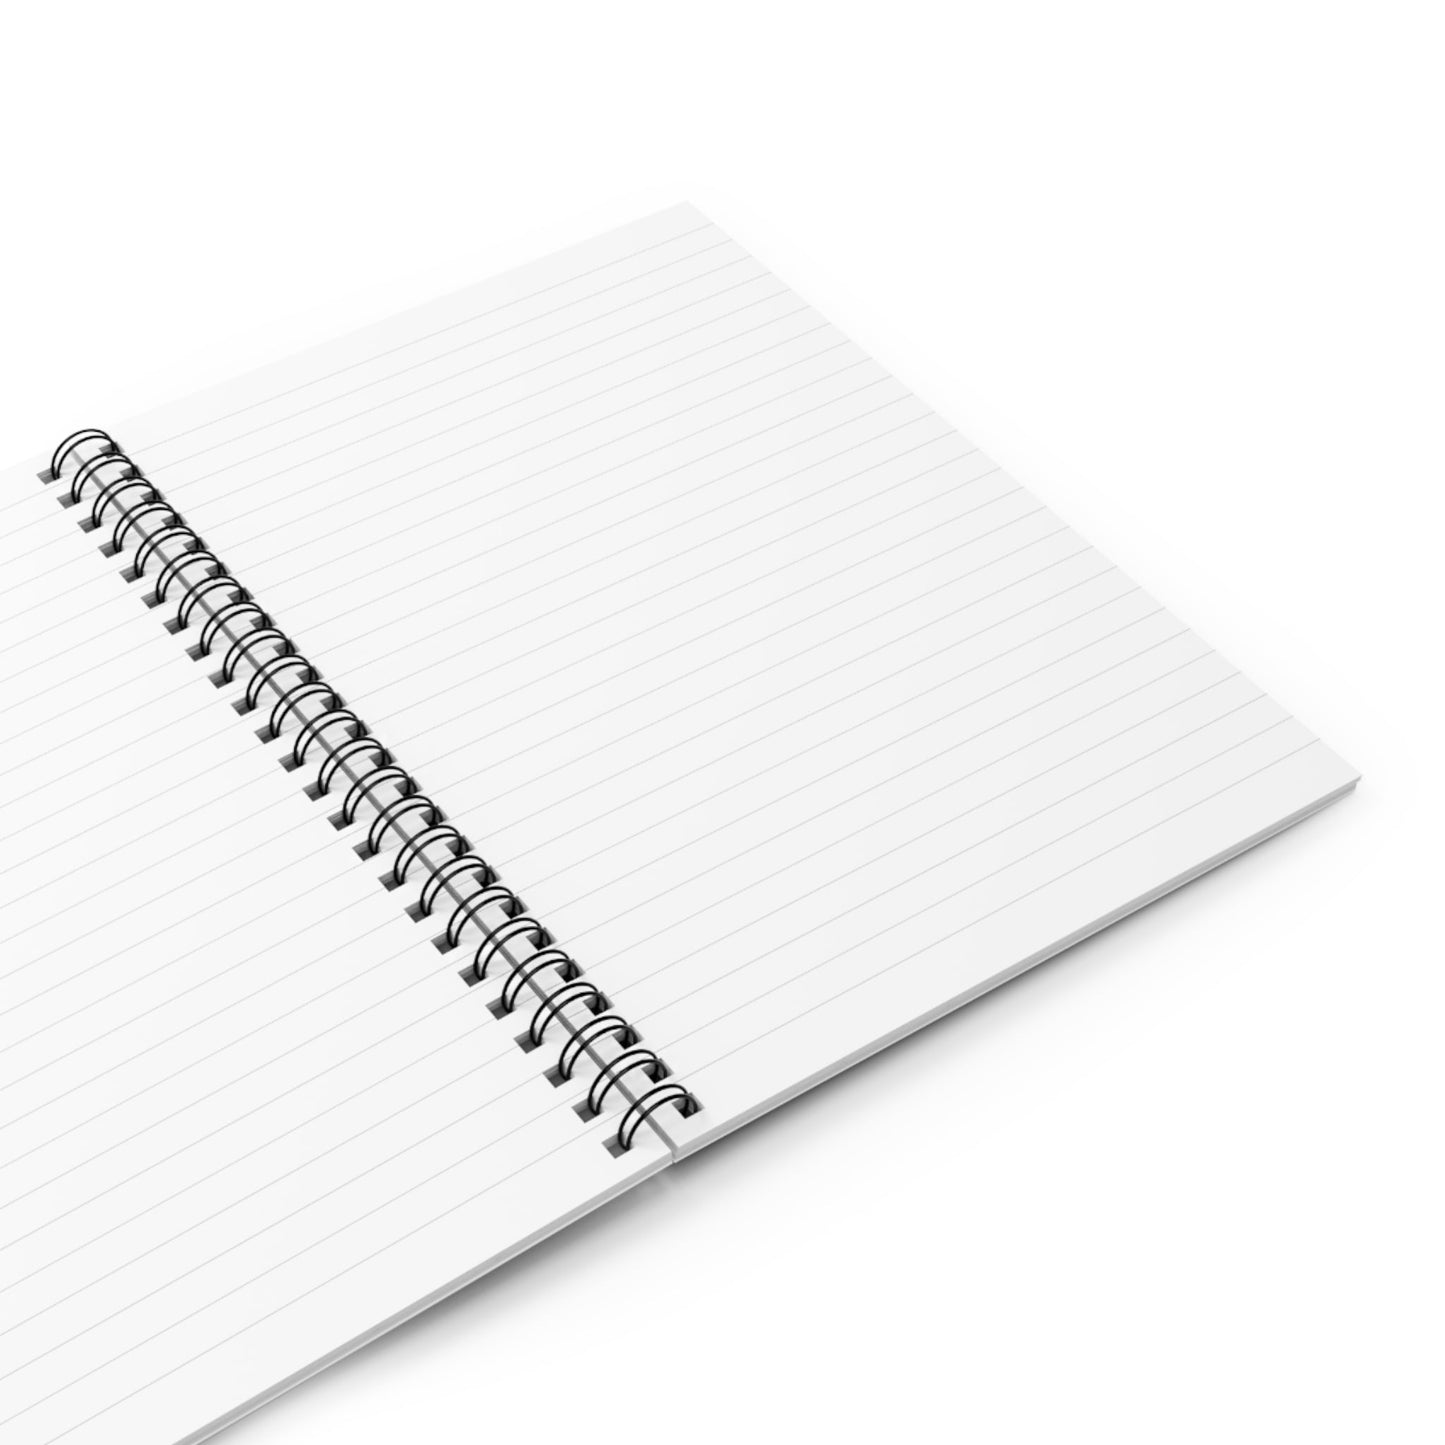 Spiral Notebook with Dark Sea Cover Opened with Blank White College Ruled Pages